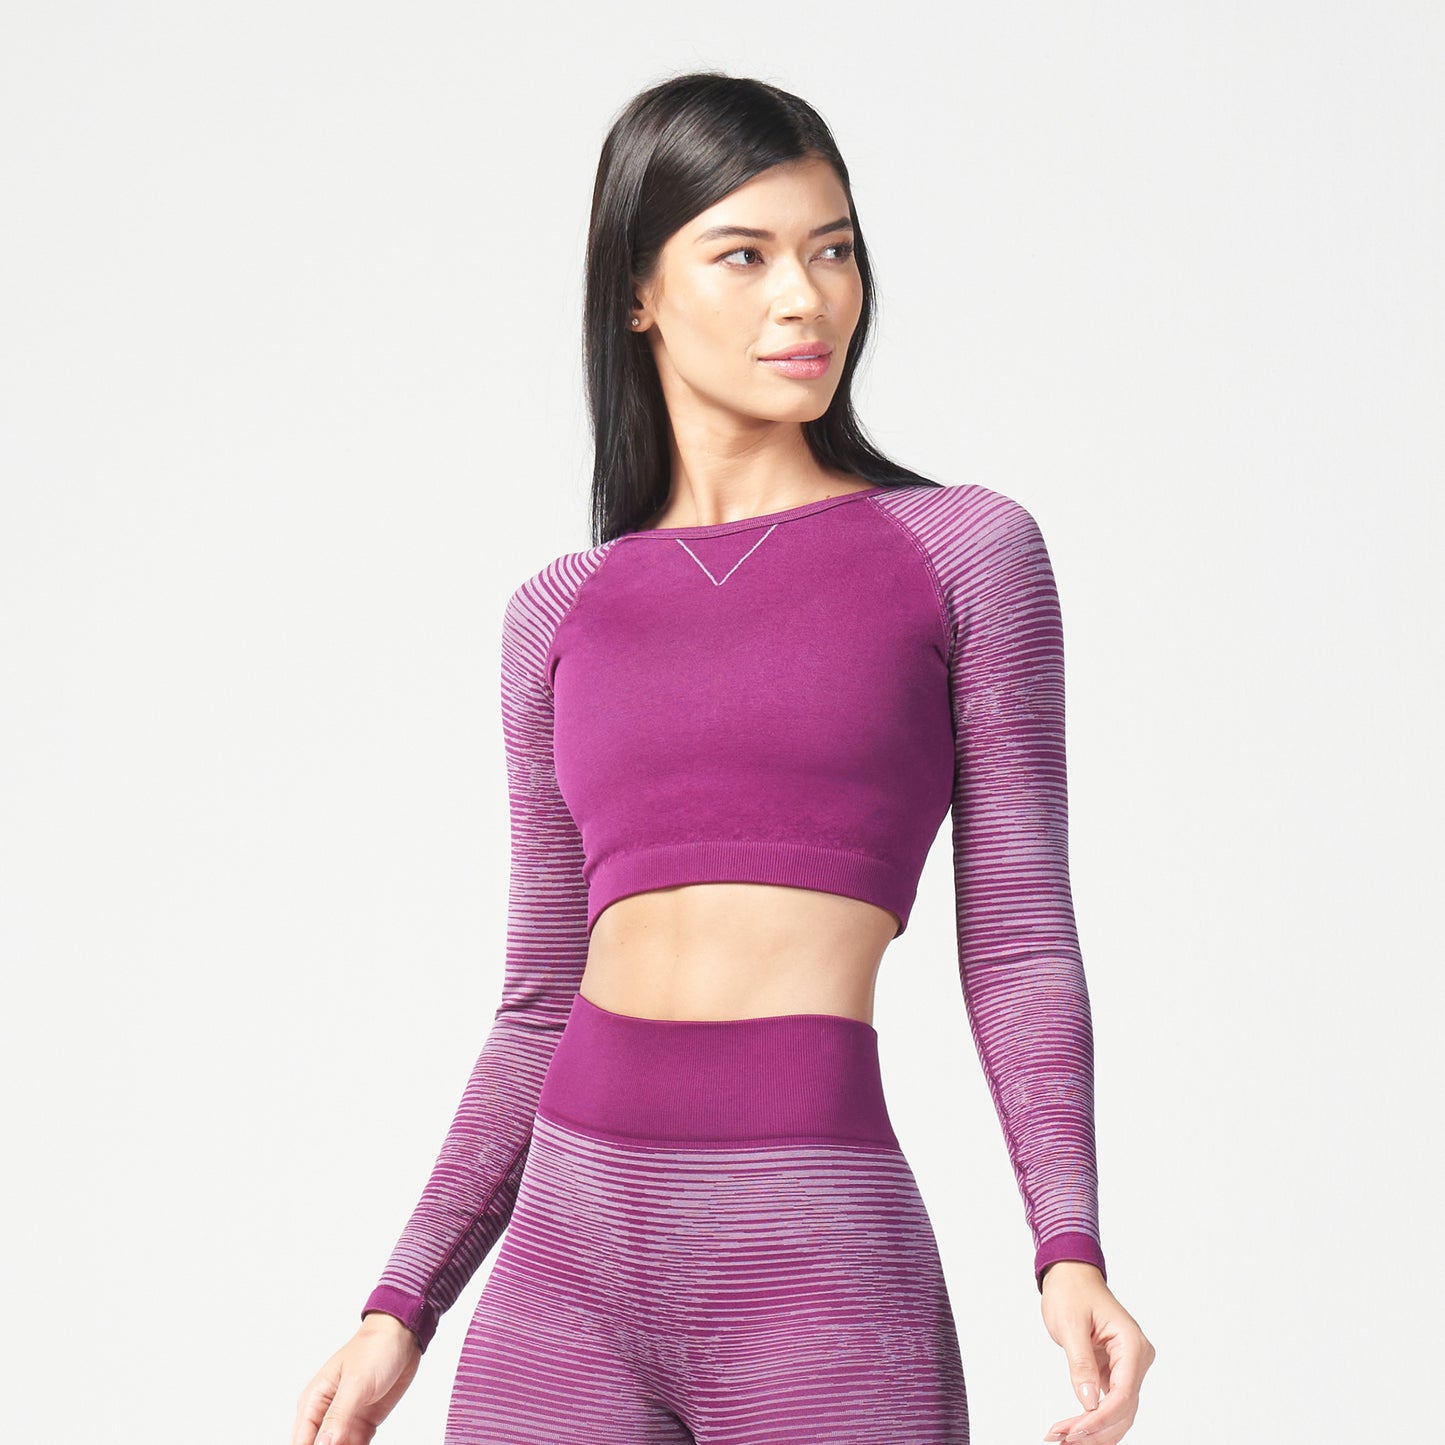 squatwolf-workout-clothes-infinity-stripe-seamless-crop-top-dark-purple-gym-t-shirts-for-women